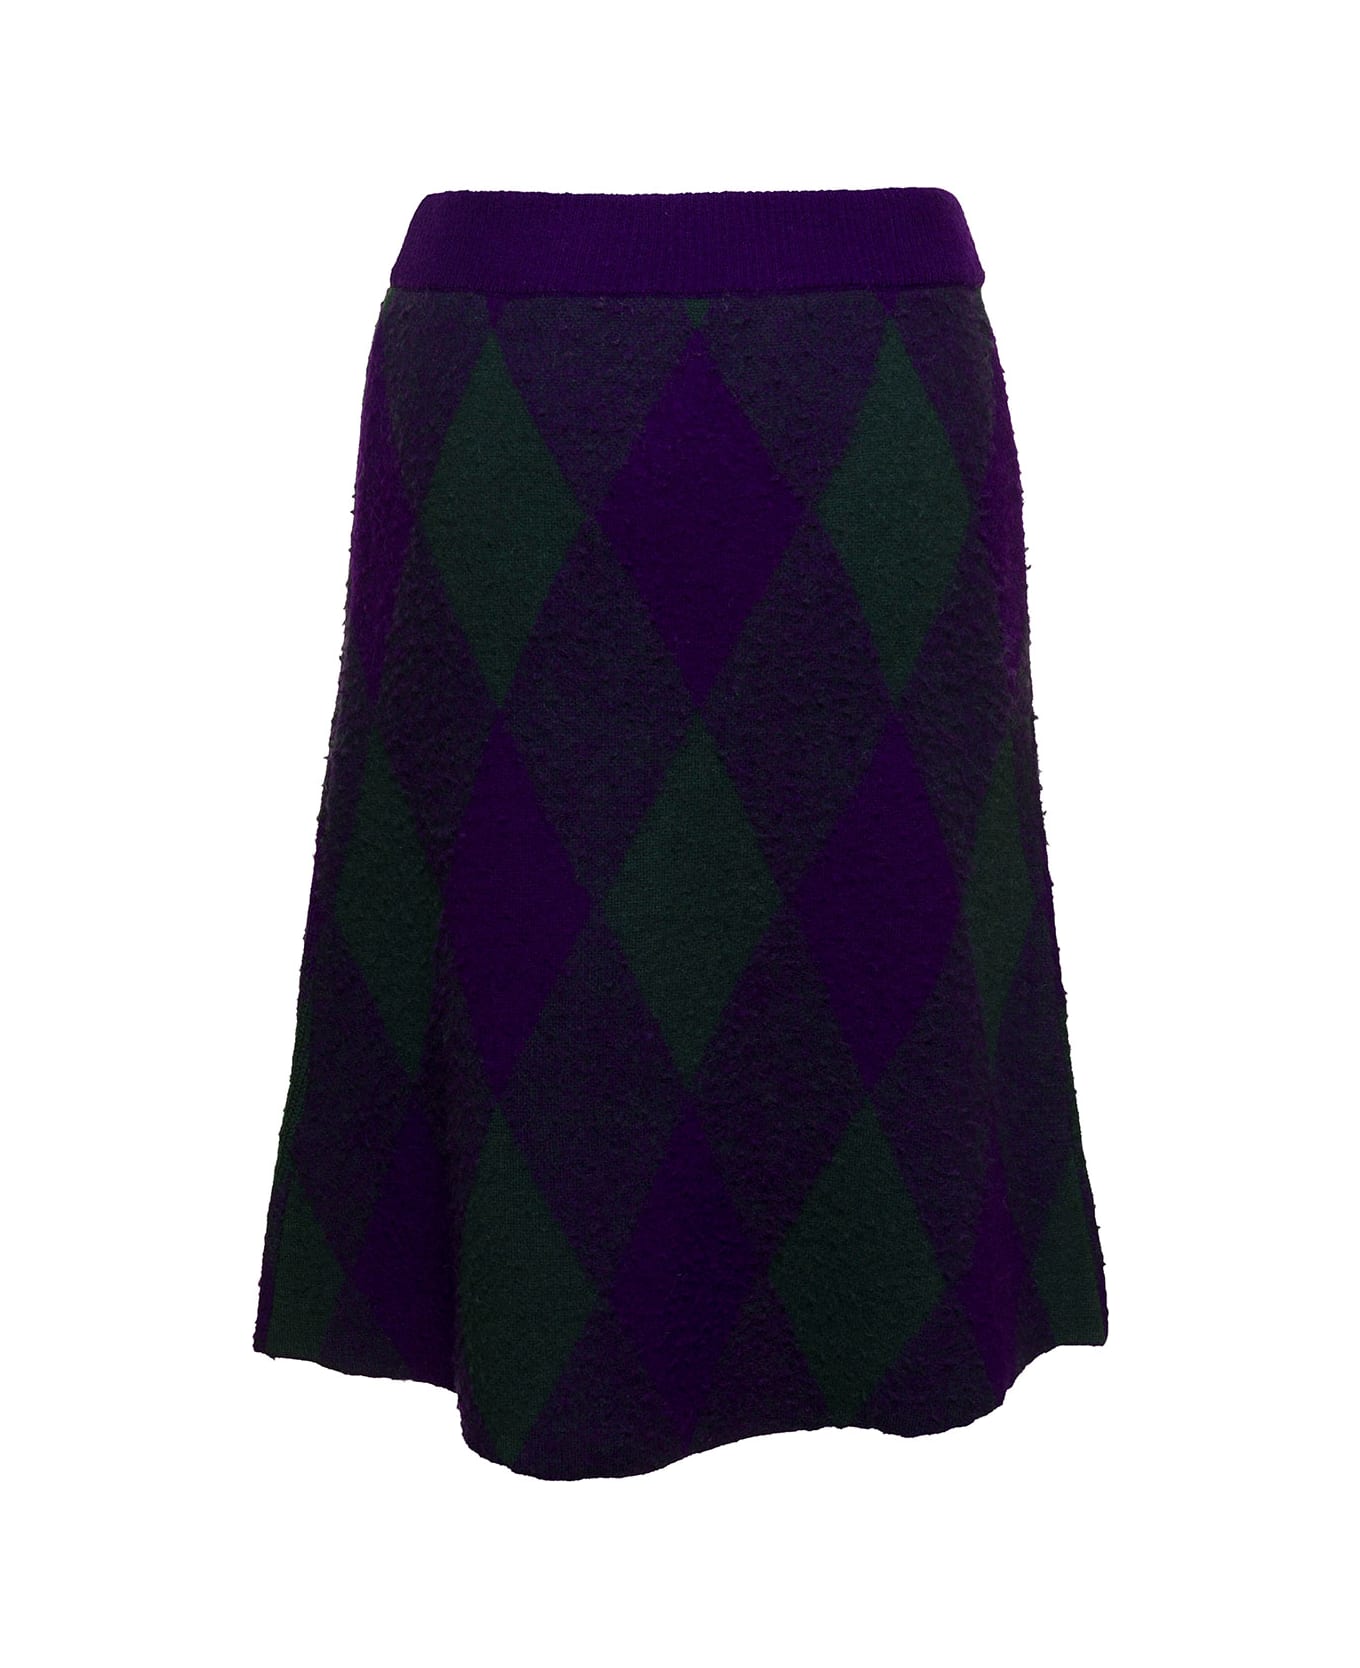 Burberry Midi Purple Skirt With Argyle Print In Wool Woman - Violet